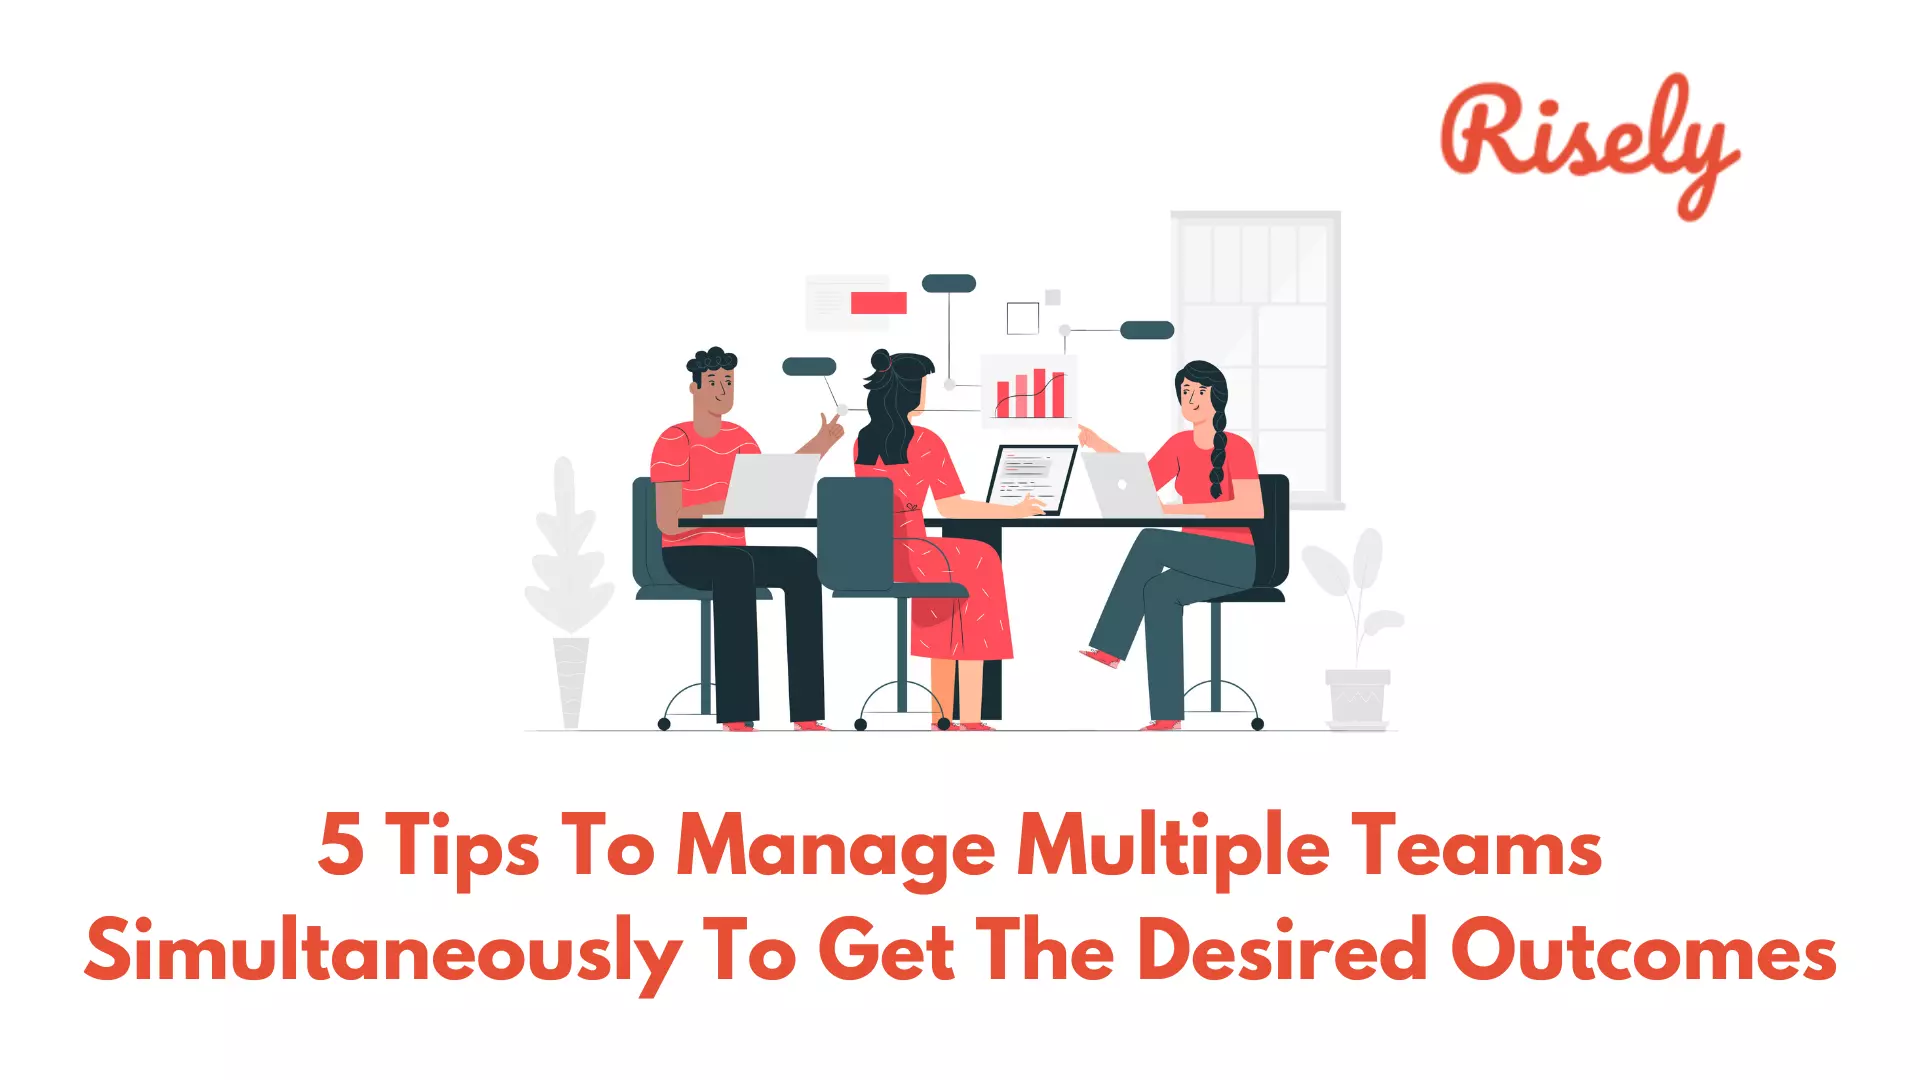 5 Tips To Manage Multiple Teams Simultaneously To Get The Desired Outcomes